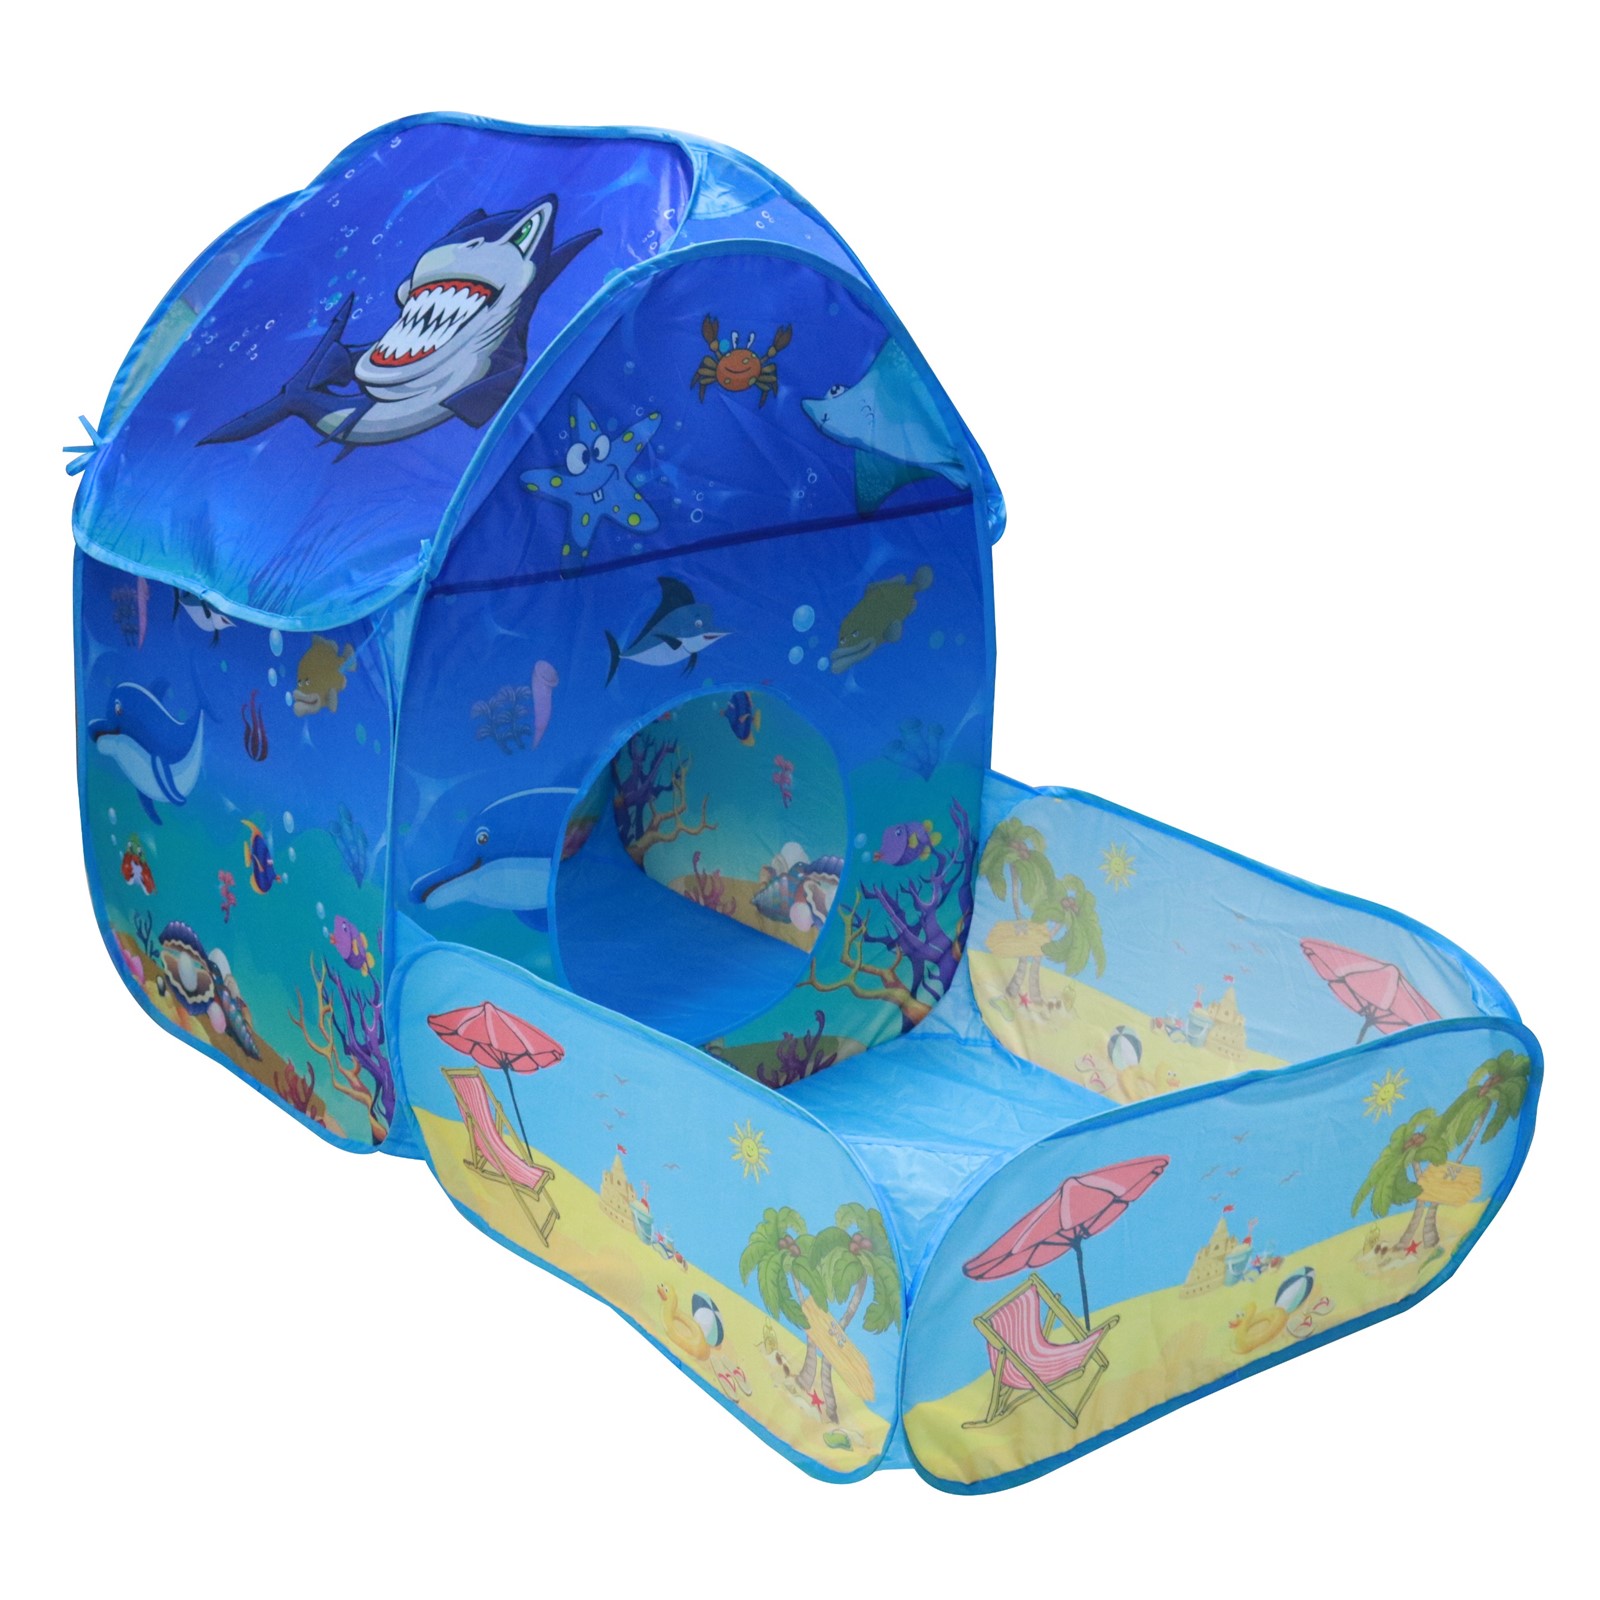 Vokodo Kids Pop Up Tent with Play Pen Area Beach Marine Animal Theme Folding Indoor Outdoor Playhouse Tunnel Pretend Imagination Creative Learning Toy Gift for Preschool Children Boys Girls Toddlers